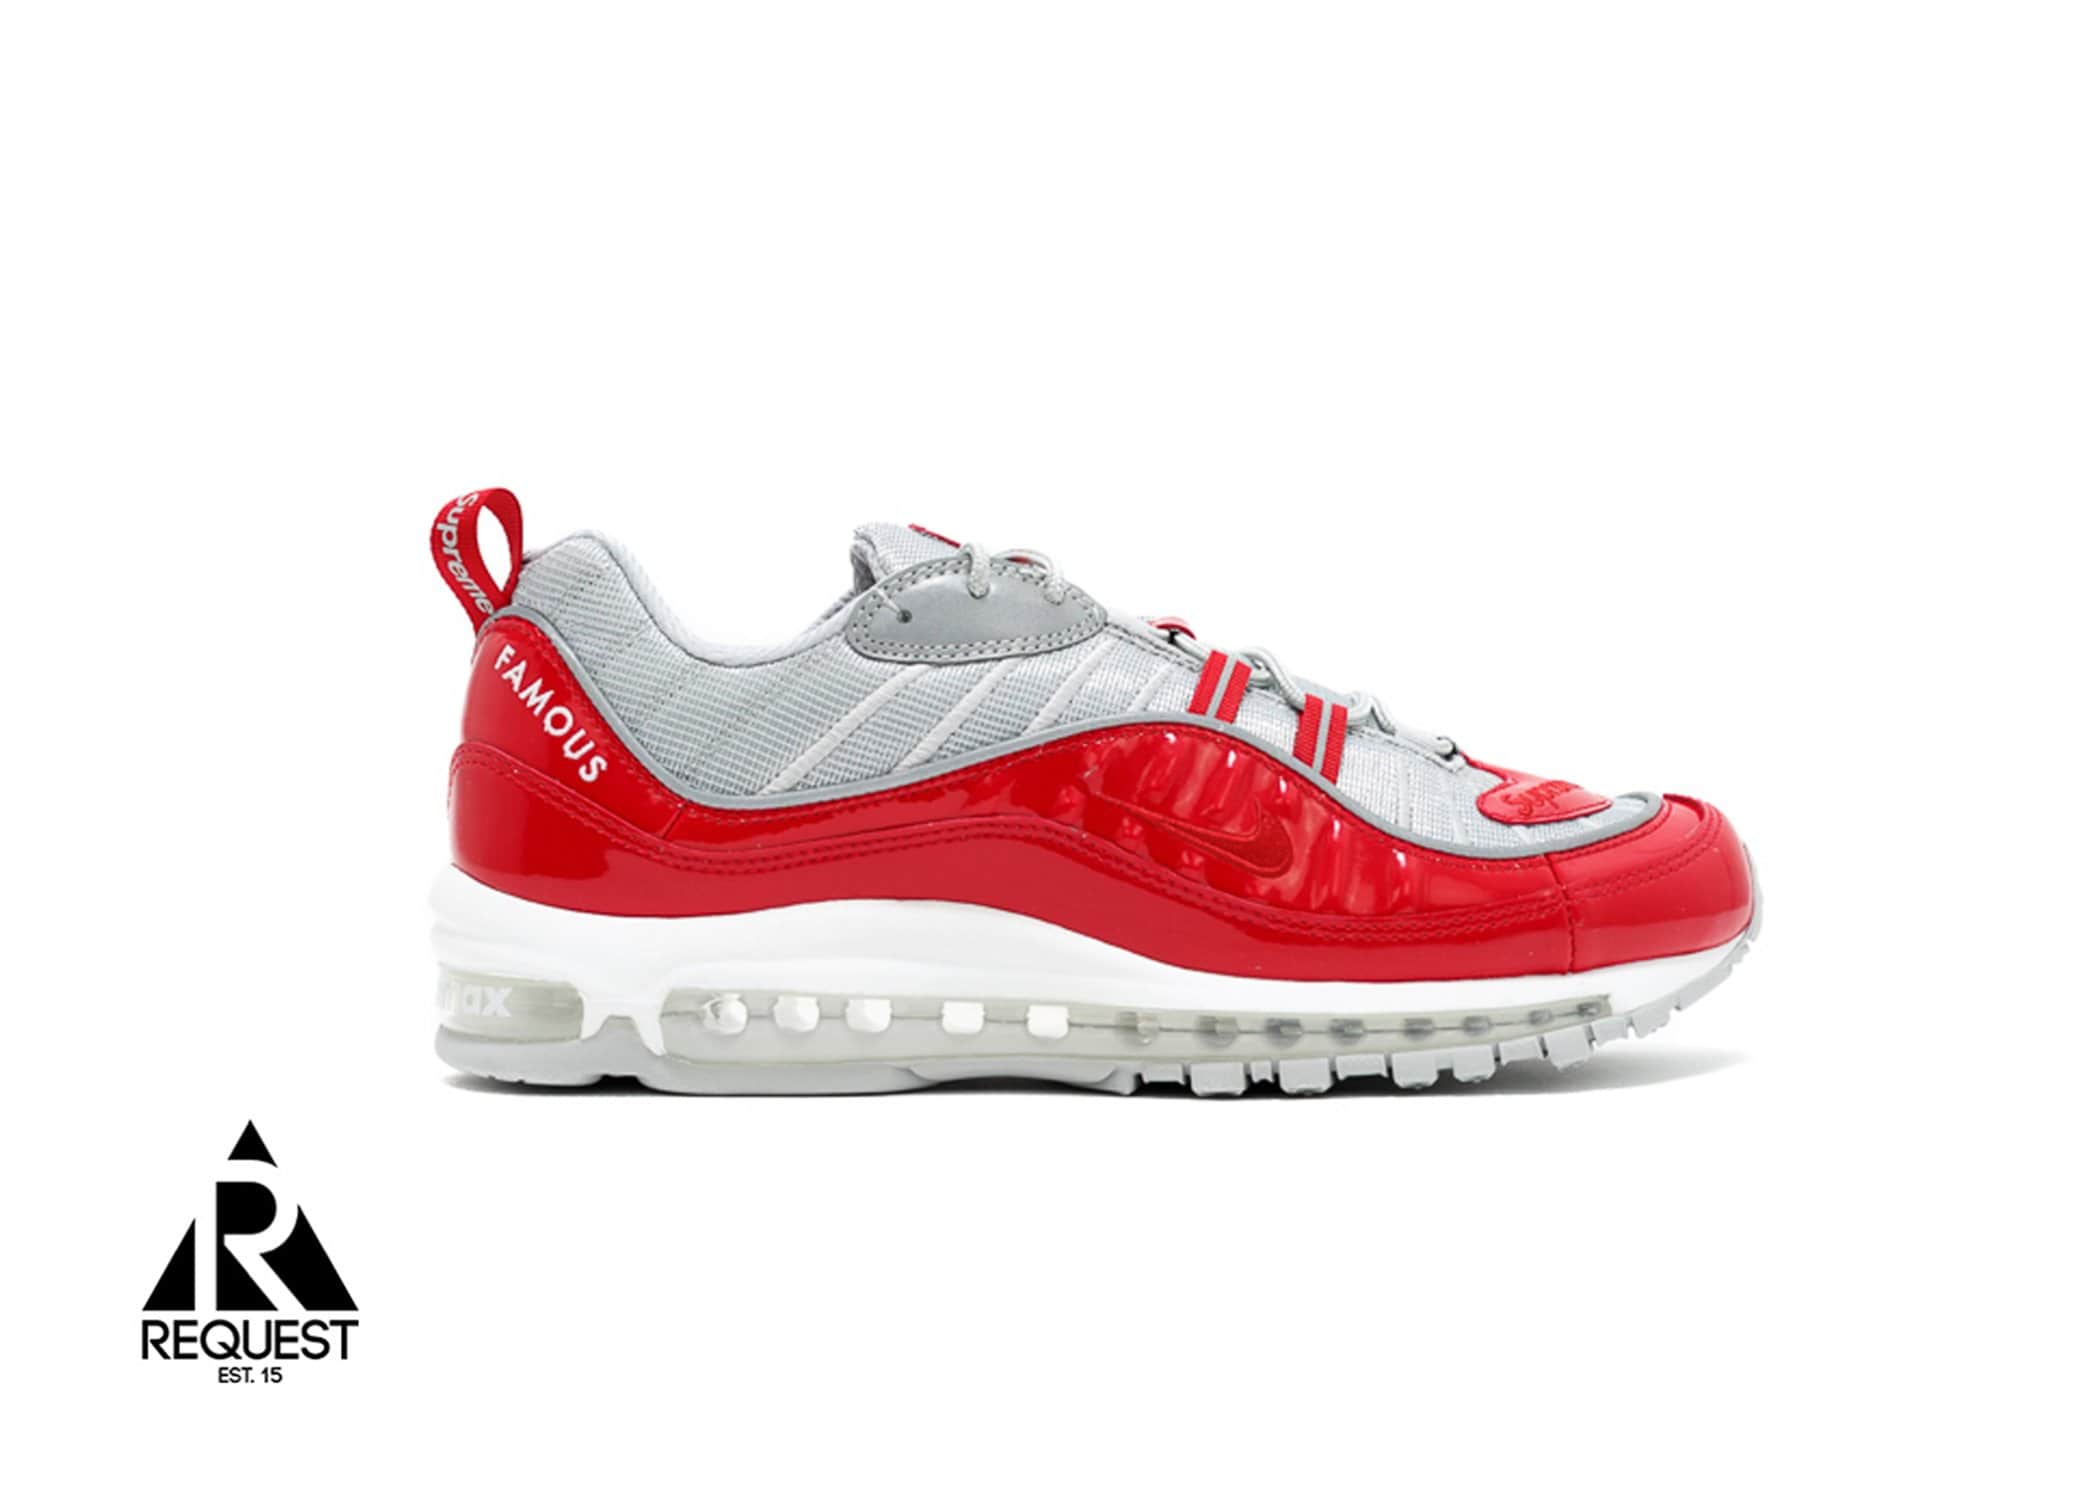 Air Max 98 Supreme “Red” Request